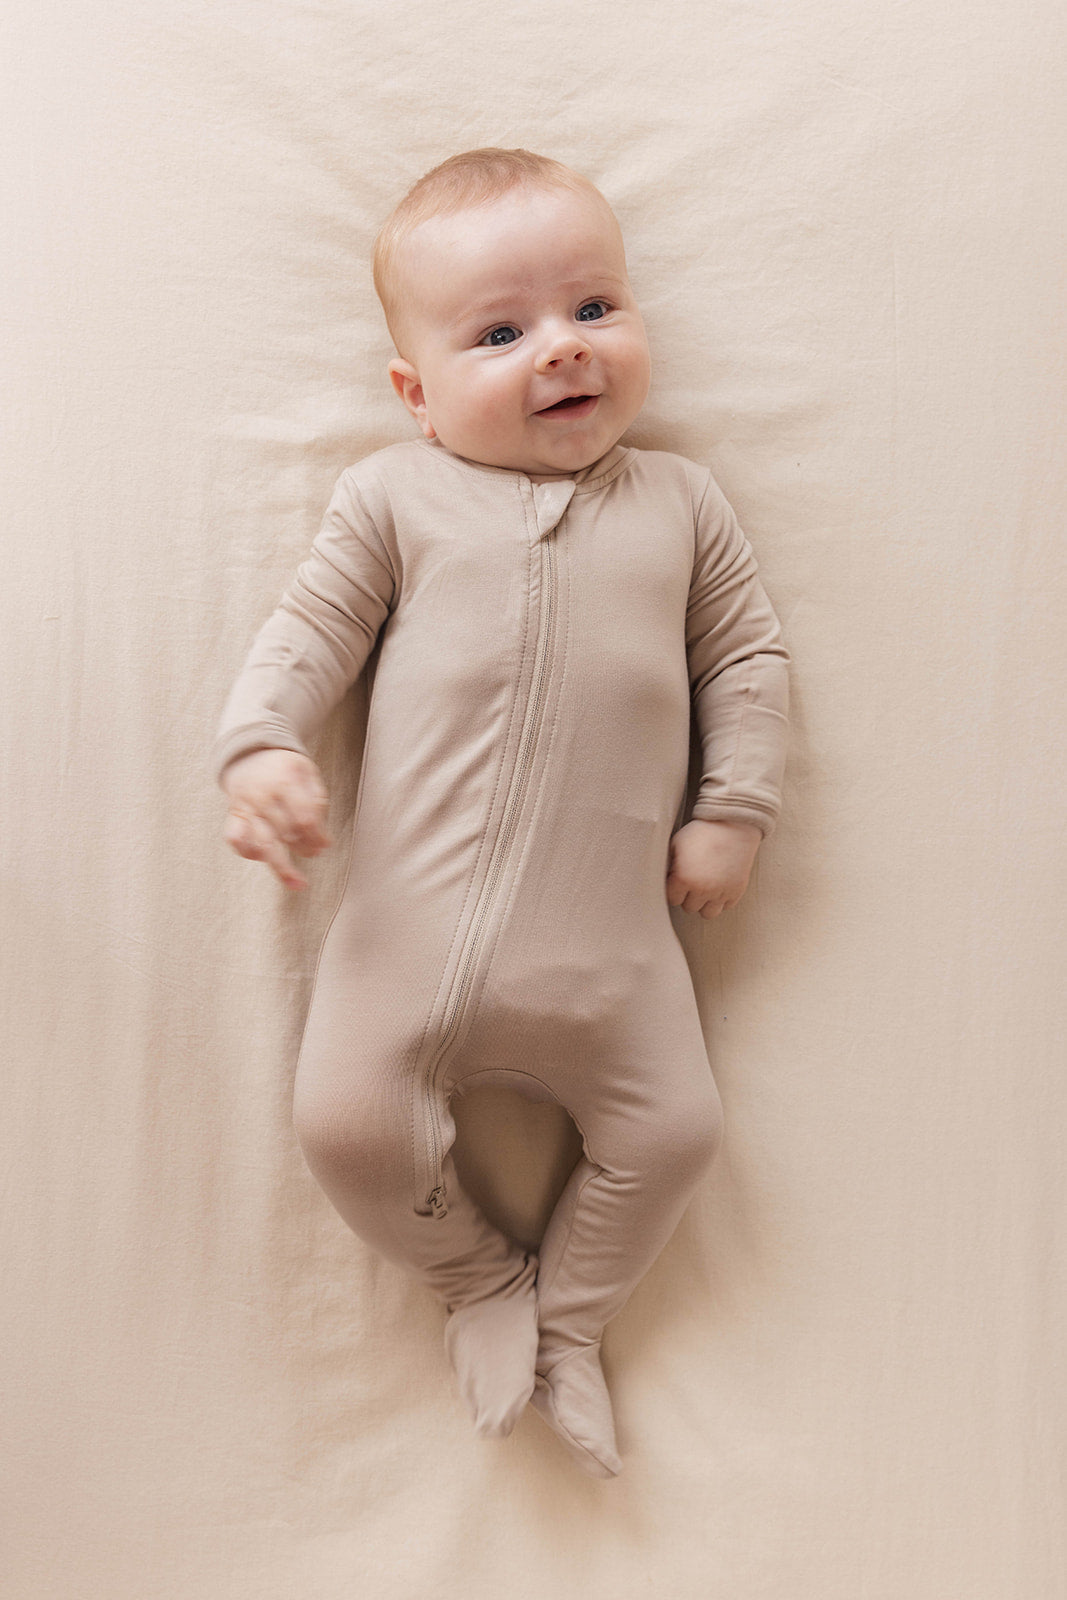 Infant Footless Onesies - Footed Pajamas Co.